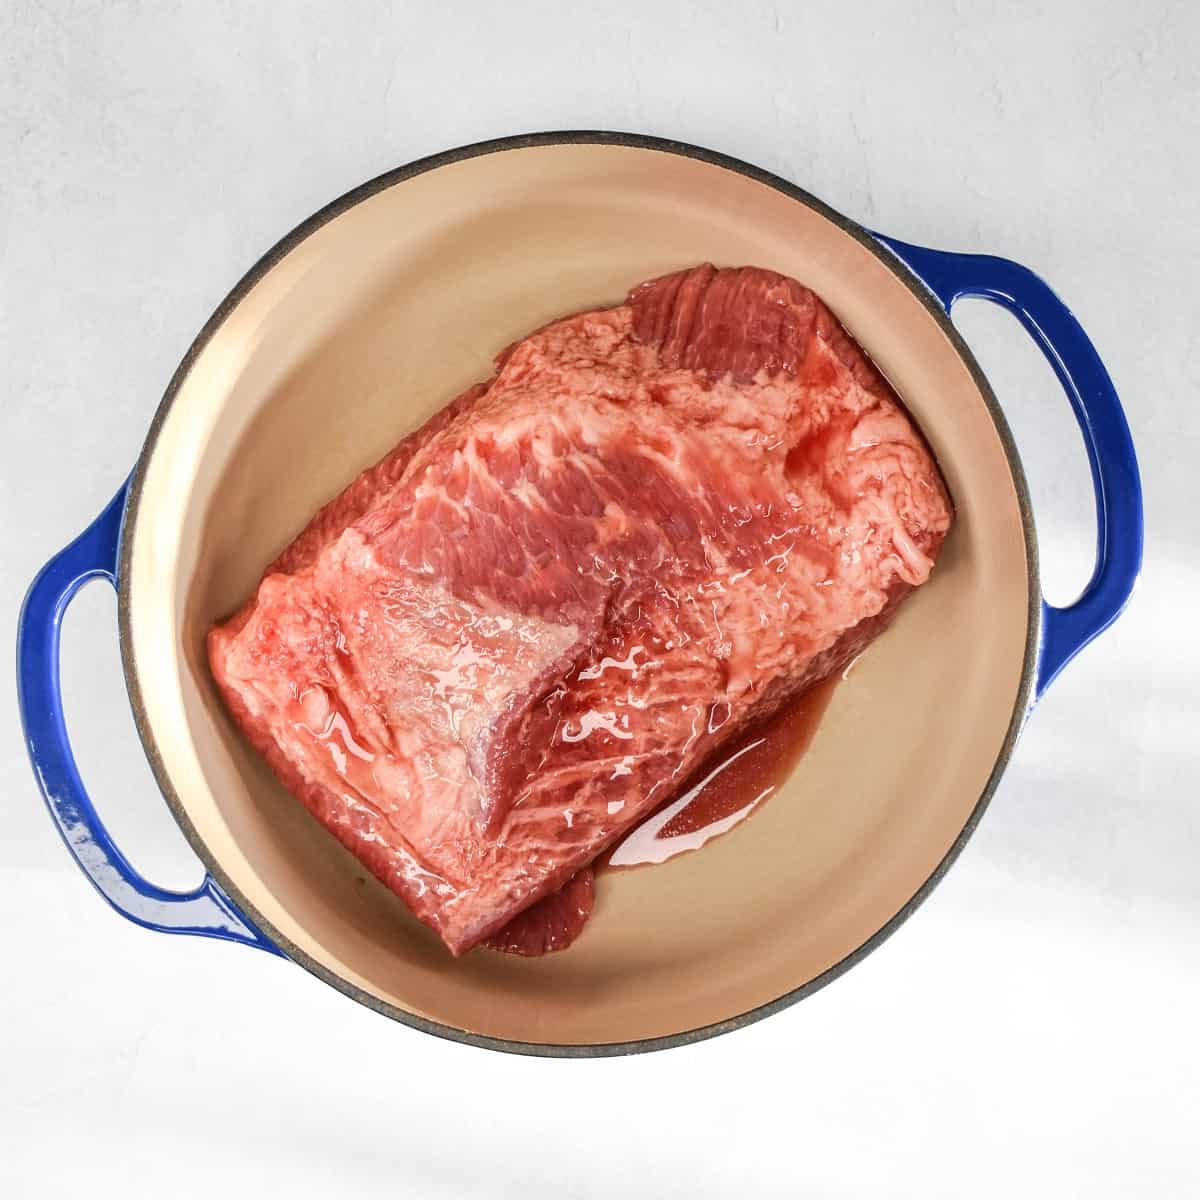 An image of the uncooked meat in a large, enameled Dutch oven.